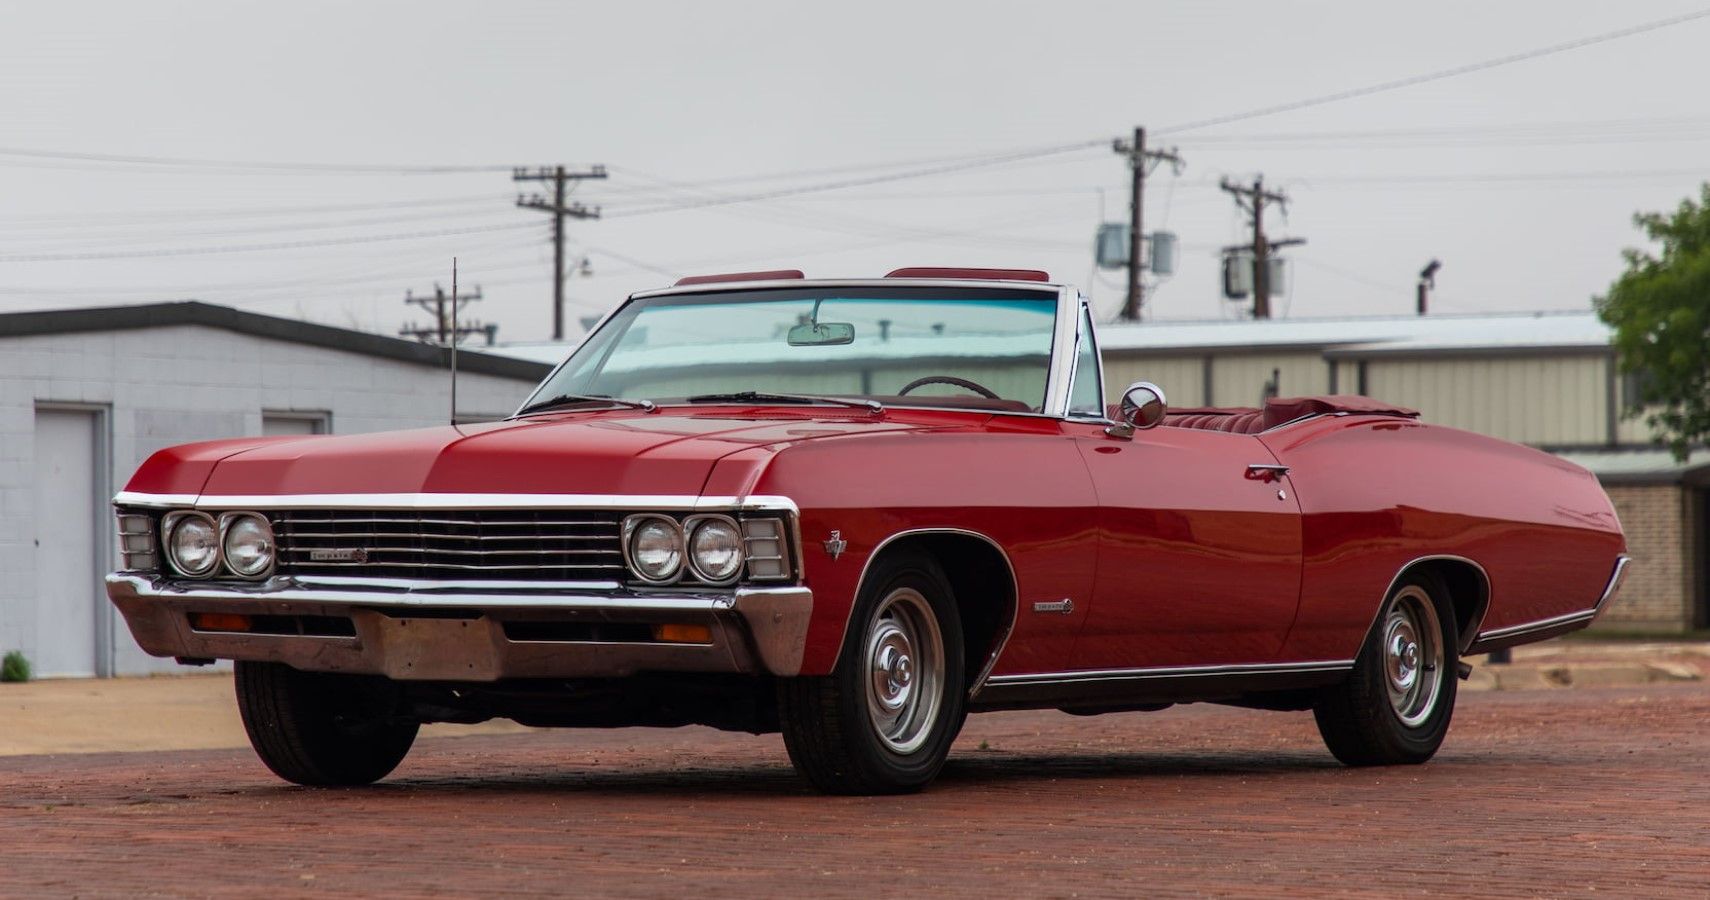 Red 1967 Chevrolet Impala SS Convertible front third quarter cinematic view